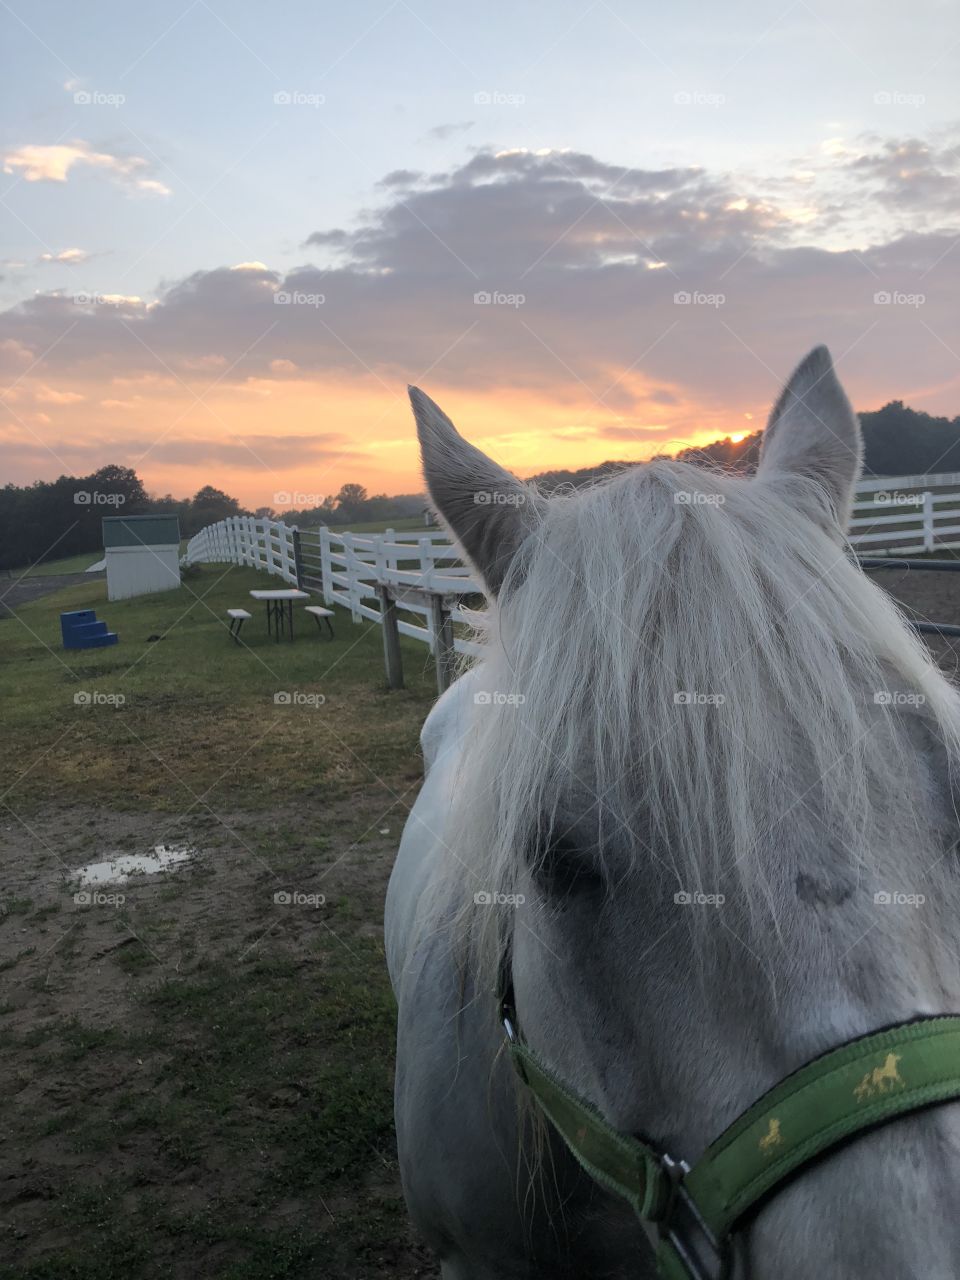 When you love something so much you don’t wanna leave and you end up with two things you love in your sight. Horses and the sunset 